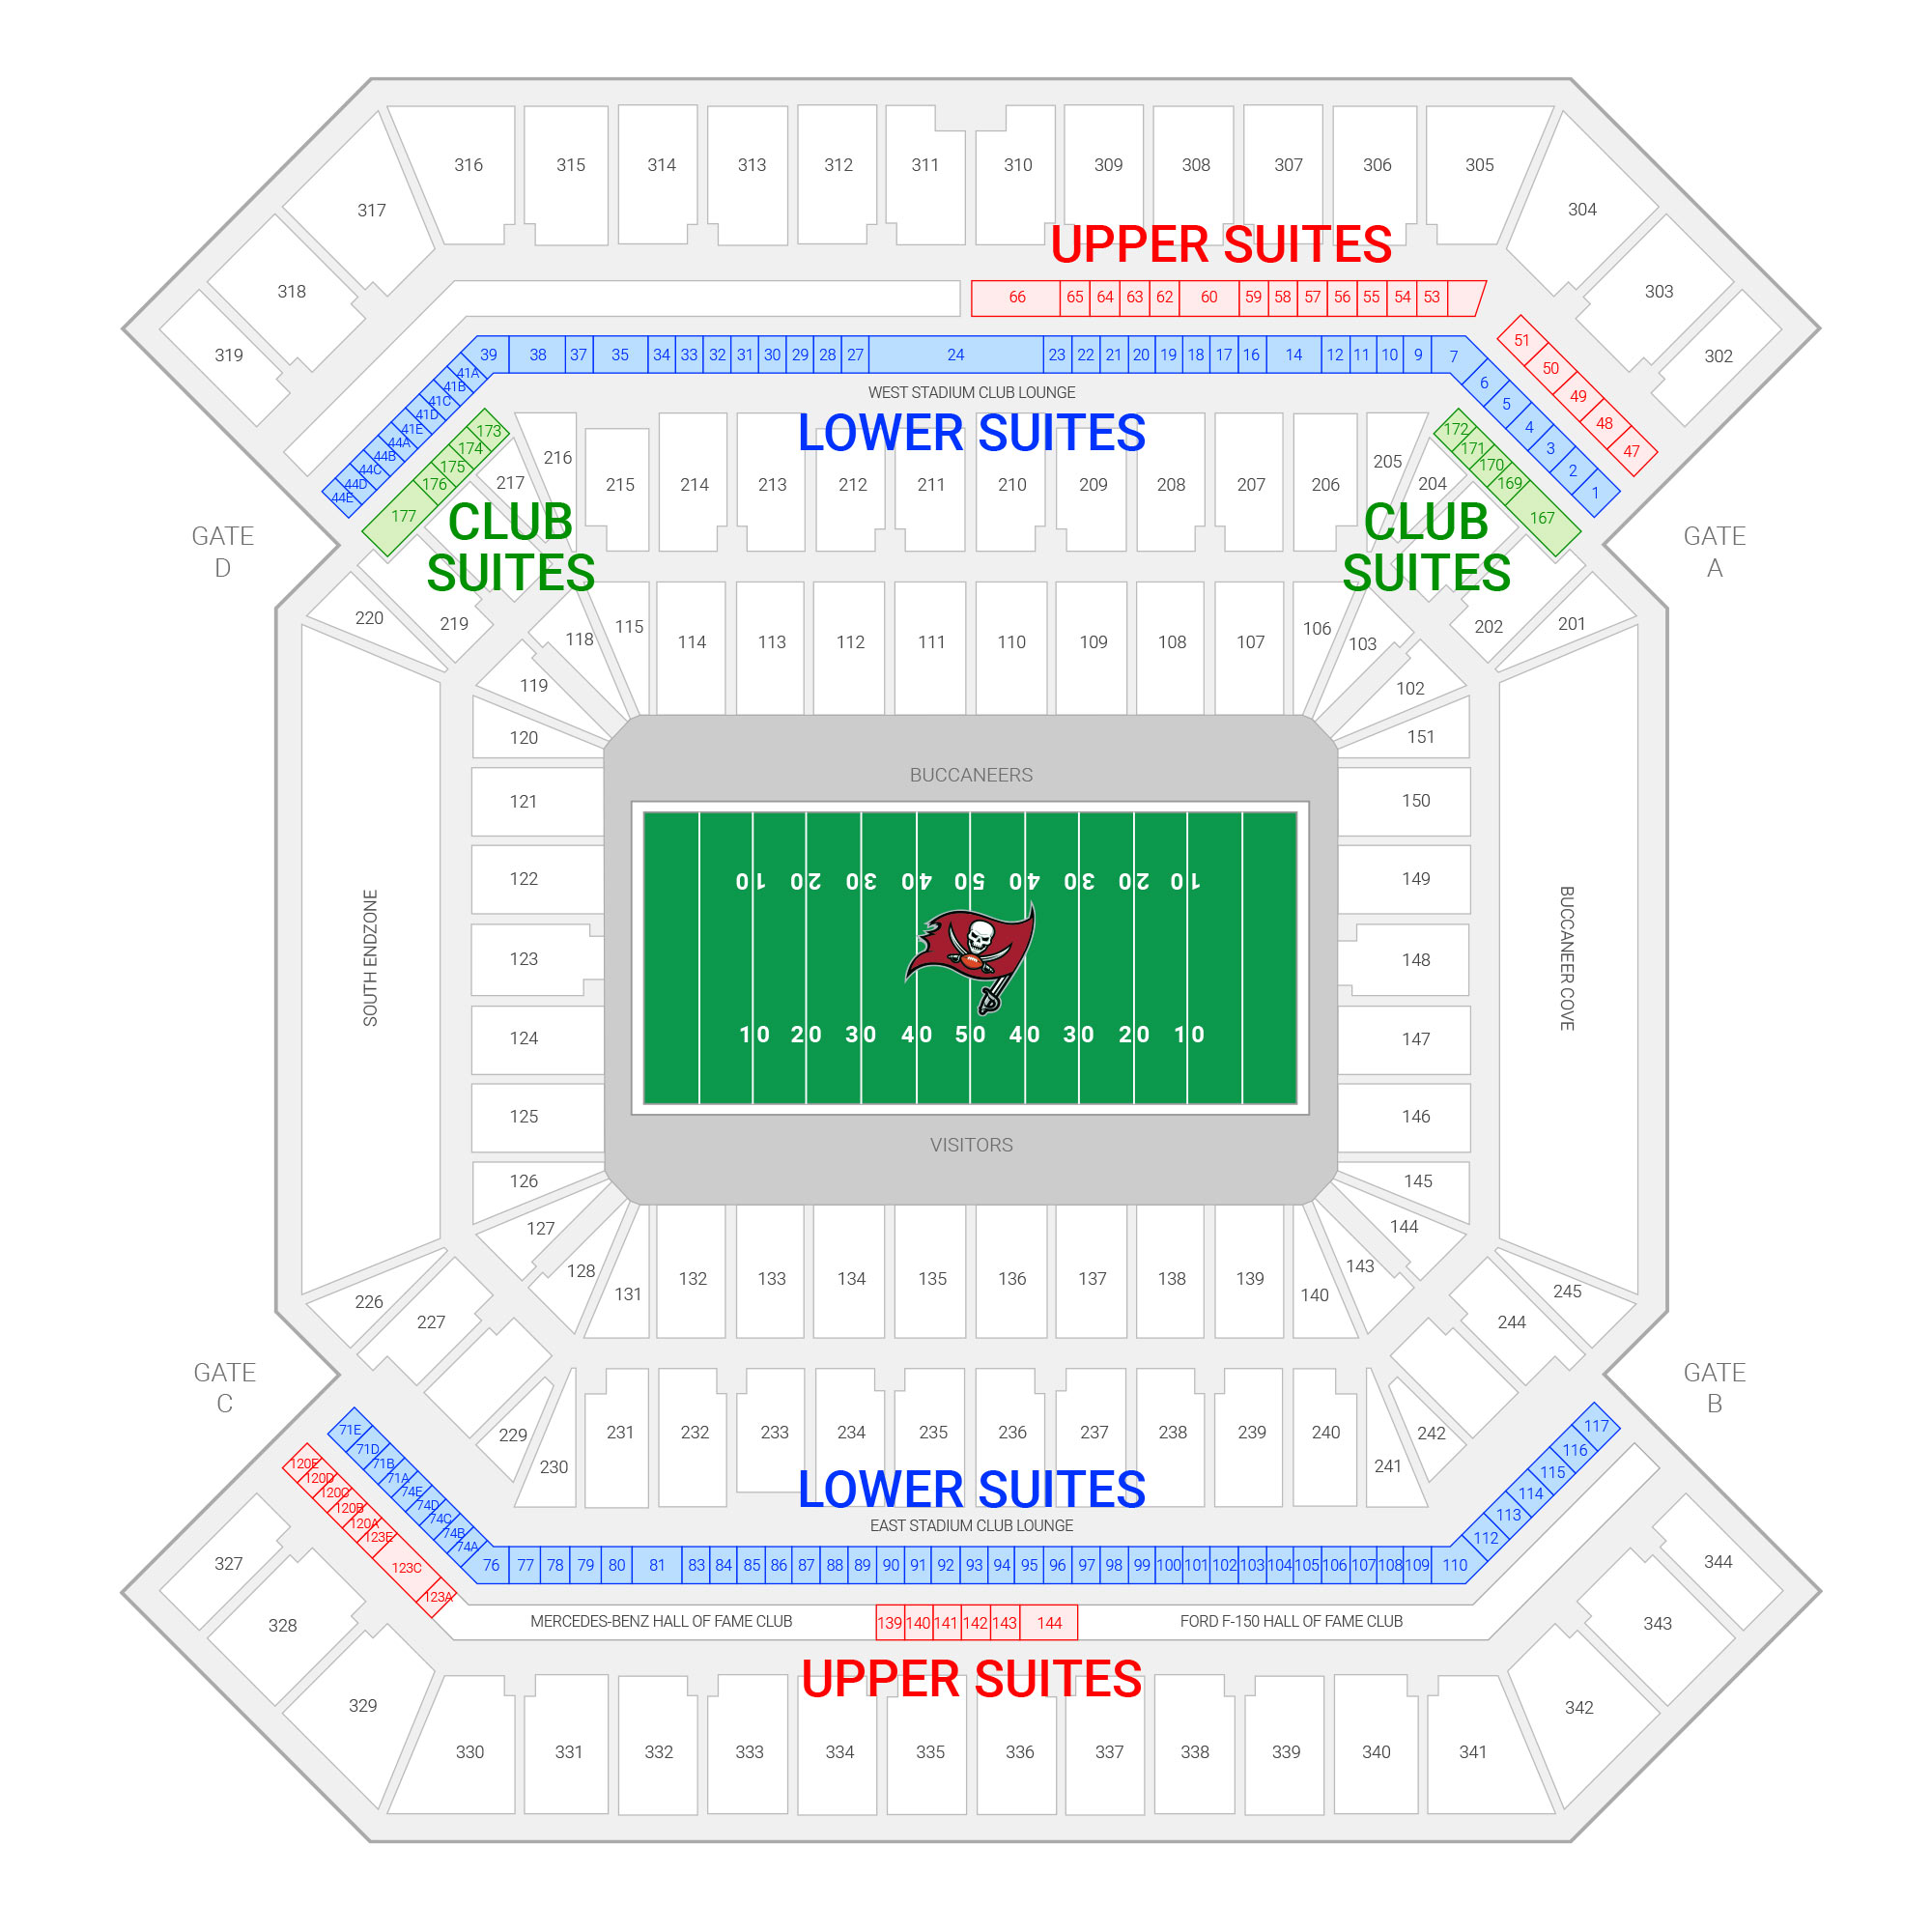 Buccaneers Season Tickets Are Available -  - Tampa Bay Bucs  Blog, Buccaneers News